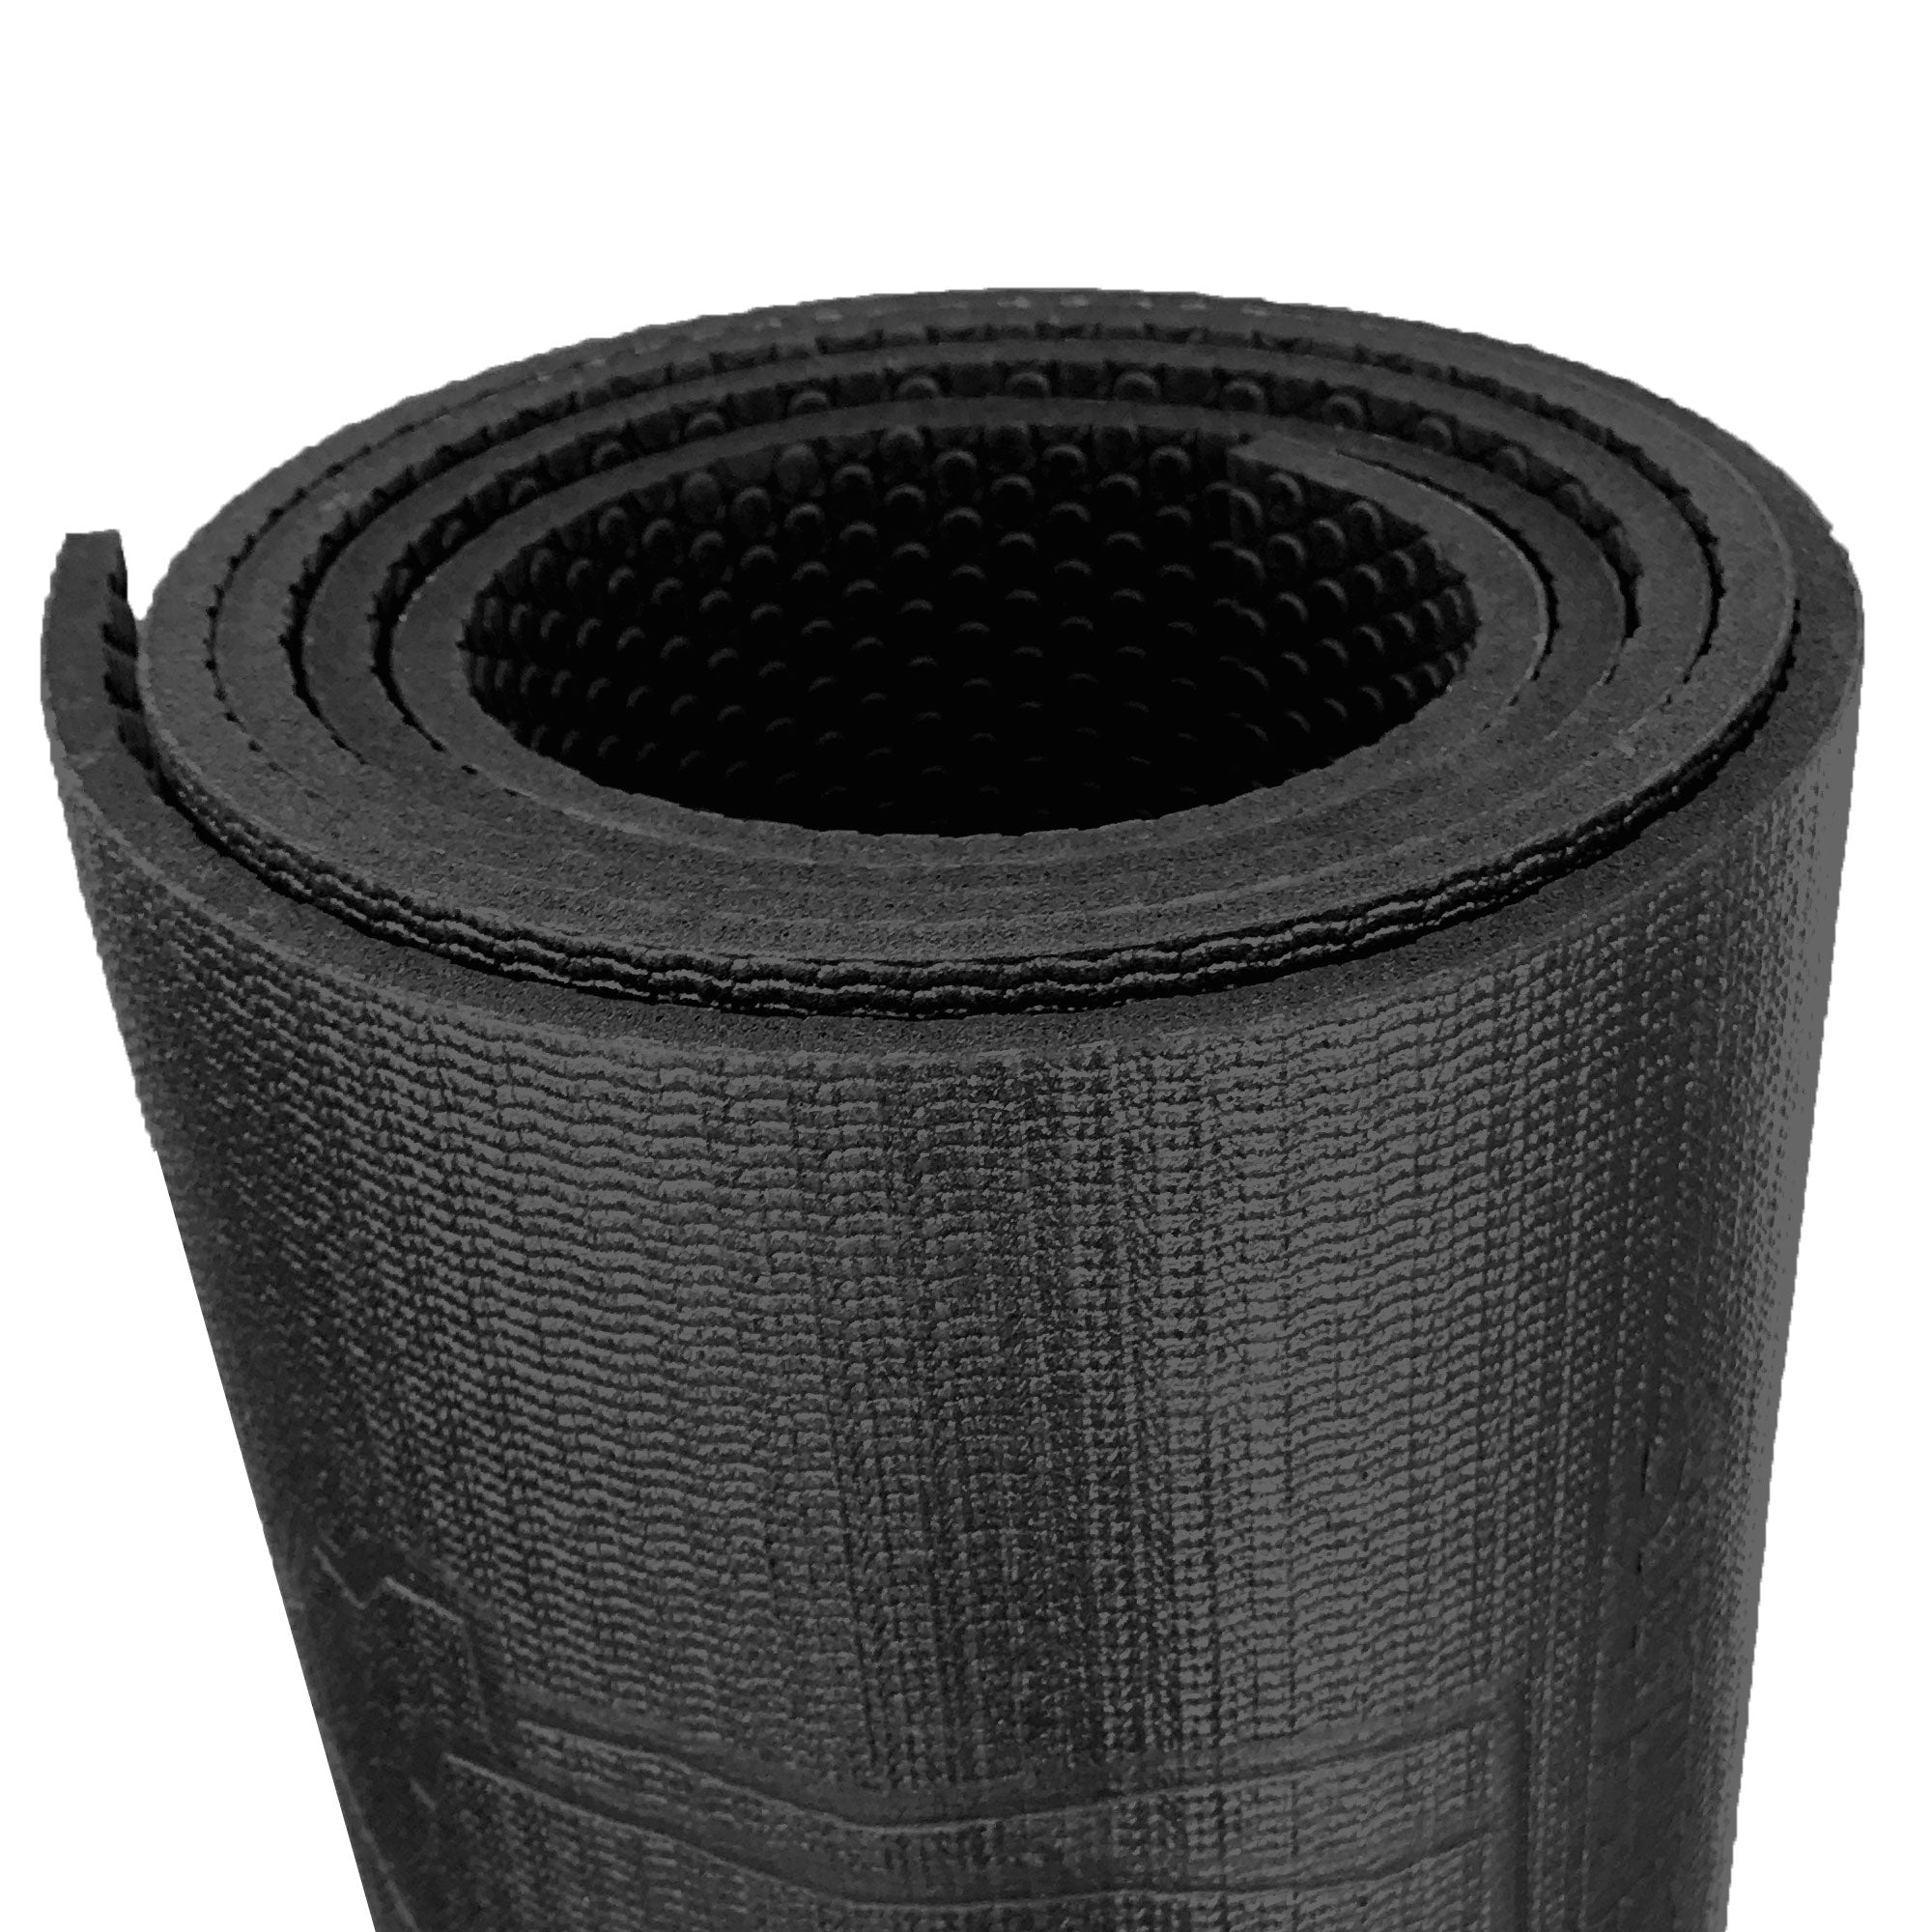  Gorilla Mats Premium Large Exercise Mat – 6' x 4' x 1/4 Ultra  Durable, Non-Slip, Workout Mat for Instant Home Gym Flooring – Works Great  on Any Floor Type or